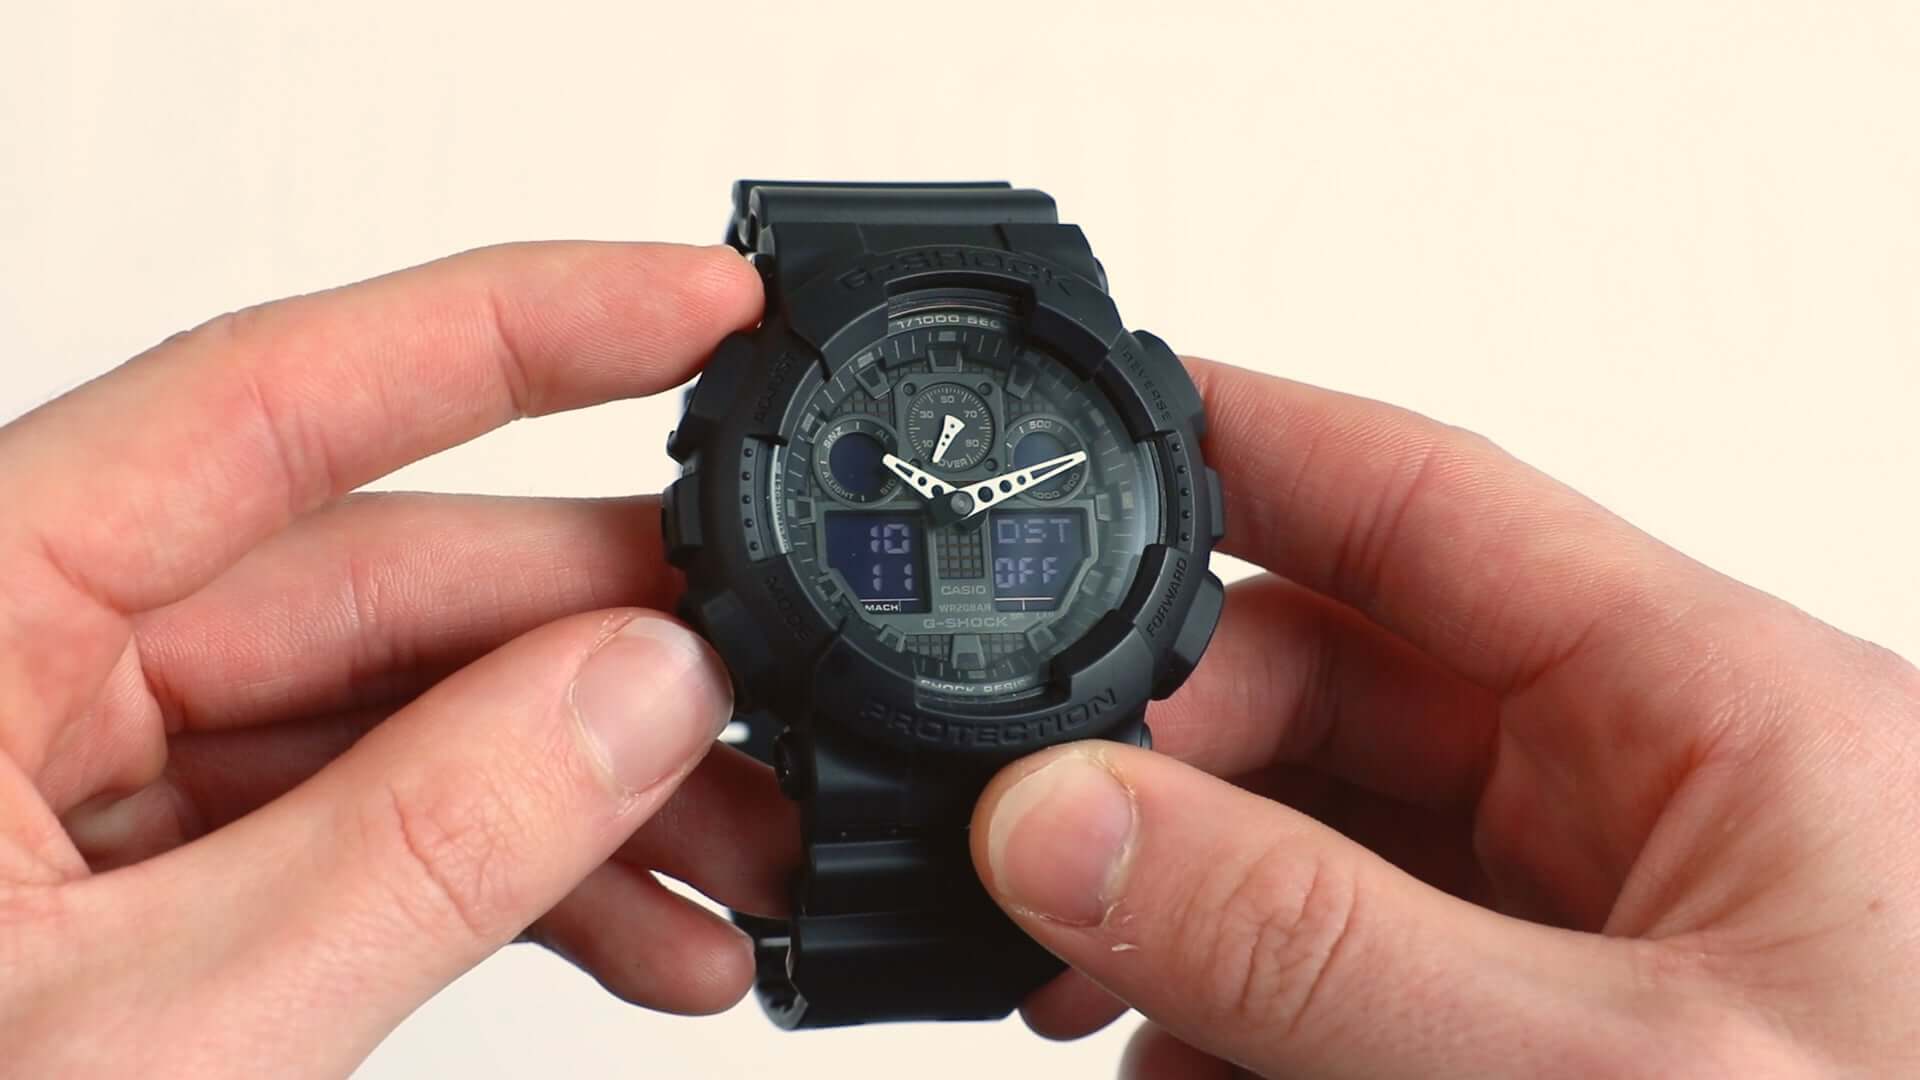 How To Set The Time On My G-Shock Watch